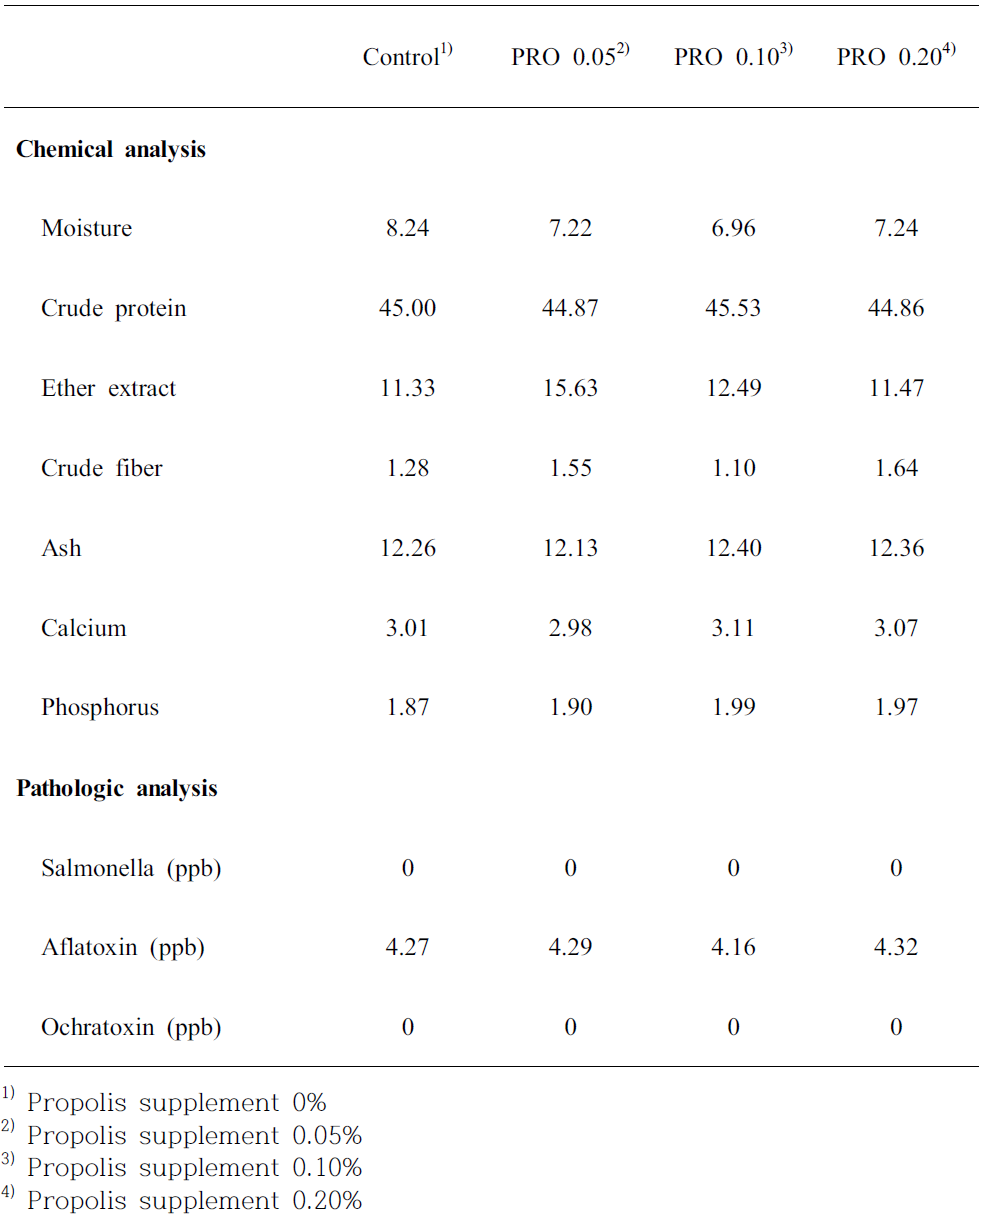 Effect of propolis supplementation on chemical analysis in extrusion (Aquaculture)